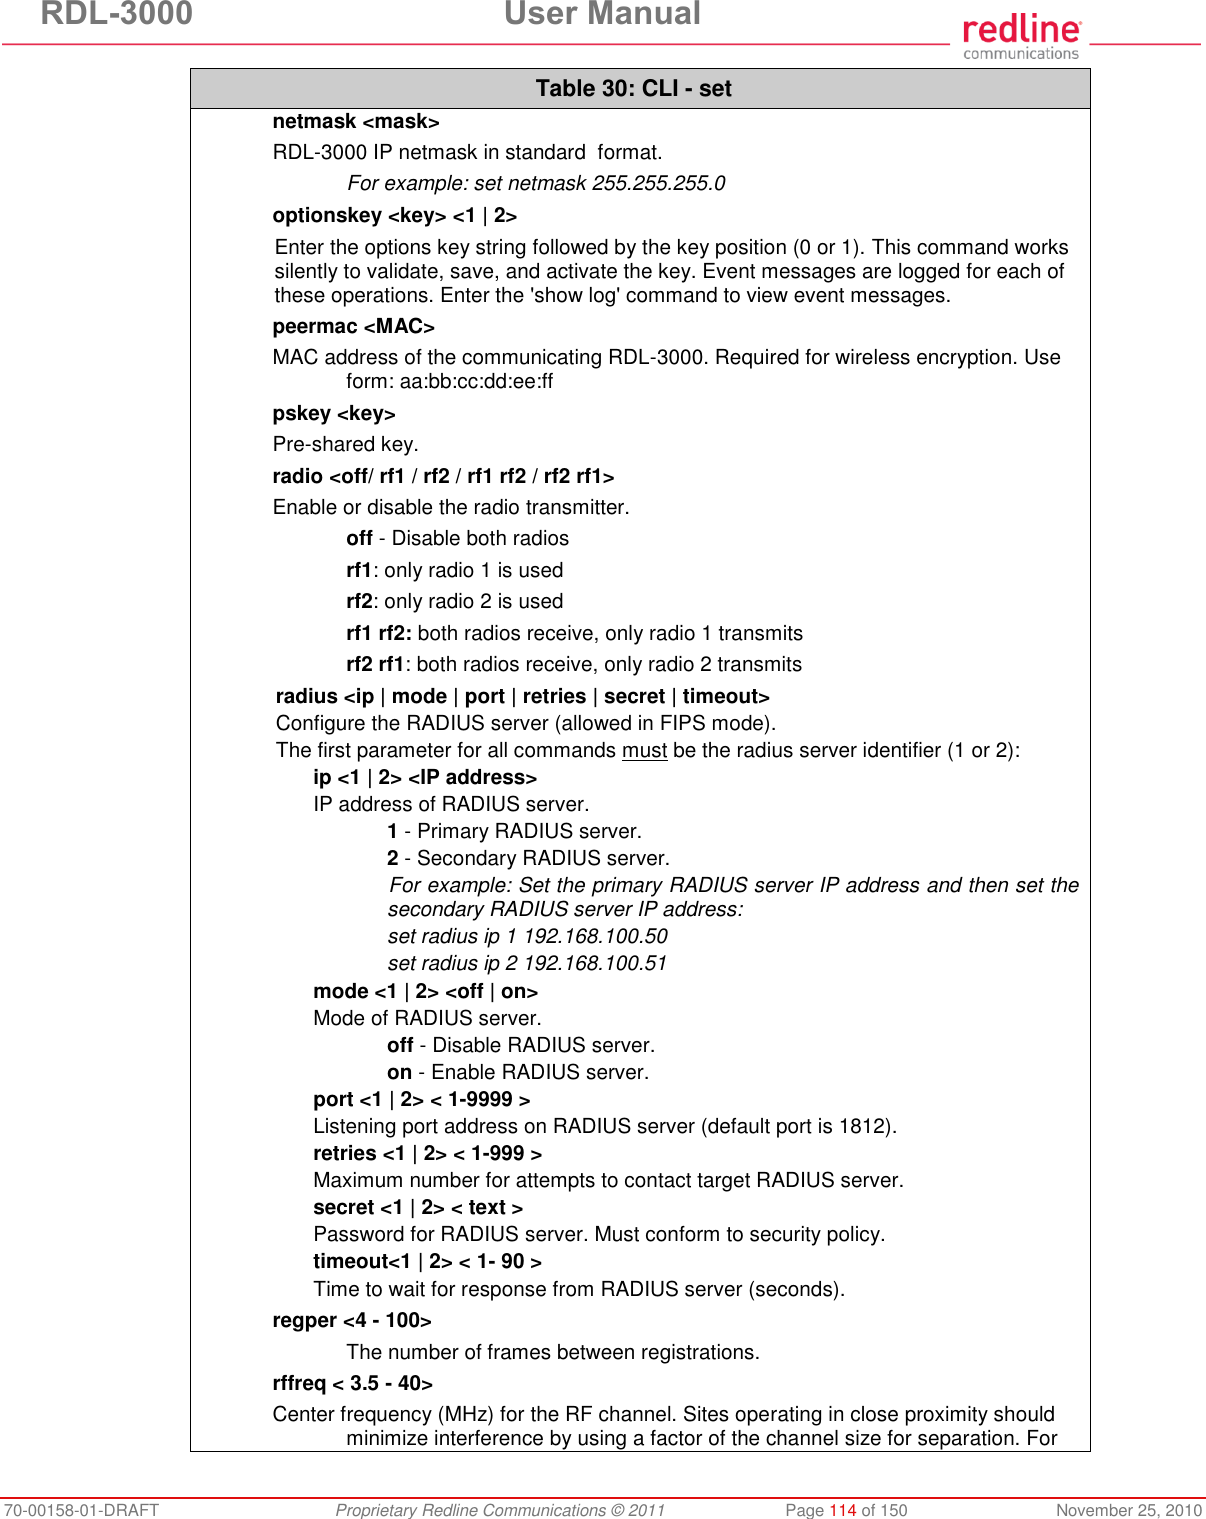 RDL-3000  User Manual 70-00158-01-DRAFT  Proprietary Redline Communications © 2011  Page 114 of 150  November 25, 2010 Table 30: CLI - set netmask &lt;mask&gt; RDL-3000 IP netmask in standard  format.   For example: set netmask 255.255.255.0 optionskey &lt;key&gt; &lt;1 | 2&gt; Enter the options key string followed by the key position (0 or 1). This command works silently to validate, save, and activate the key. Event messages are logged for each of these operations. Enter the &apos;show log&apos; command to view event messages. peermac &lt;MAC&gt; MAC address of the communicating RDL-3000. Required for wireless encryption. Use form: aa:bb:cc:dd:ee:ff pskey &lt;key&gt; Pre-shared key. radio &lt;off/ rf1 / rf2 / rf1 rf2 / rf2 rf1&gt; Enable or disable the radio transmitter.  off - Disable both radios  rf1: only radio 1 is used  rf2: only radio 2 is used  rf1 rf2: both radios receive, only radio 1 transmits  rf2 rf1: both radios receive, only radio 2 transmits radius &lt;ip | mode | port | retries | secret | timeout&gt; Configure the RADIUS server (allowed in FIPS mode). The first parameter for all commands must be the radius server identifier (1 or 2):  ip &lt;1 | 2&gt; &lt;IP address&gt; IP address of RADIUS server.   1 - Primary RADIUS server.   2 - Secondary RADIUS server. For example: Set the primary RADIUS server IP address and then set the secondary RADIUS server IP address:  set radius ip 1 192.168.100.50  set radius ip 2 192.168.100.51 mode &lt;1 | 2&gt; &lt;off | on&gt; Mode of RADIUS server.   off - Disable RADIUS server.  on - Enable RADIUS server. port &lt;1 | 2&gt; &lt; 1-9999 &gt; Listening port address on RADIUS server (default port is 1812). retries &lt;1 | 2&gt; &lt; 1-999 &gt; Maximum number for attempts to contact target RADIUS server. secret &lt;1 | 2&gt; &lt; text &gt; Password for RADIUS server. Must conform to security policy. timeout&lt;1 | 2&gt; &lt; 1- 90 &gt; Time to wait for response from RADIUS server (seconds). regper &lt;4 - 100&gt;  The number of frames between registrations. rffreq &lt; 3.5 - 40&gt; Center frequency (MHz) for the RF channel. Sites operating in close proximity should minimize interference by using a factor of the channel size for separation. For 